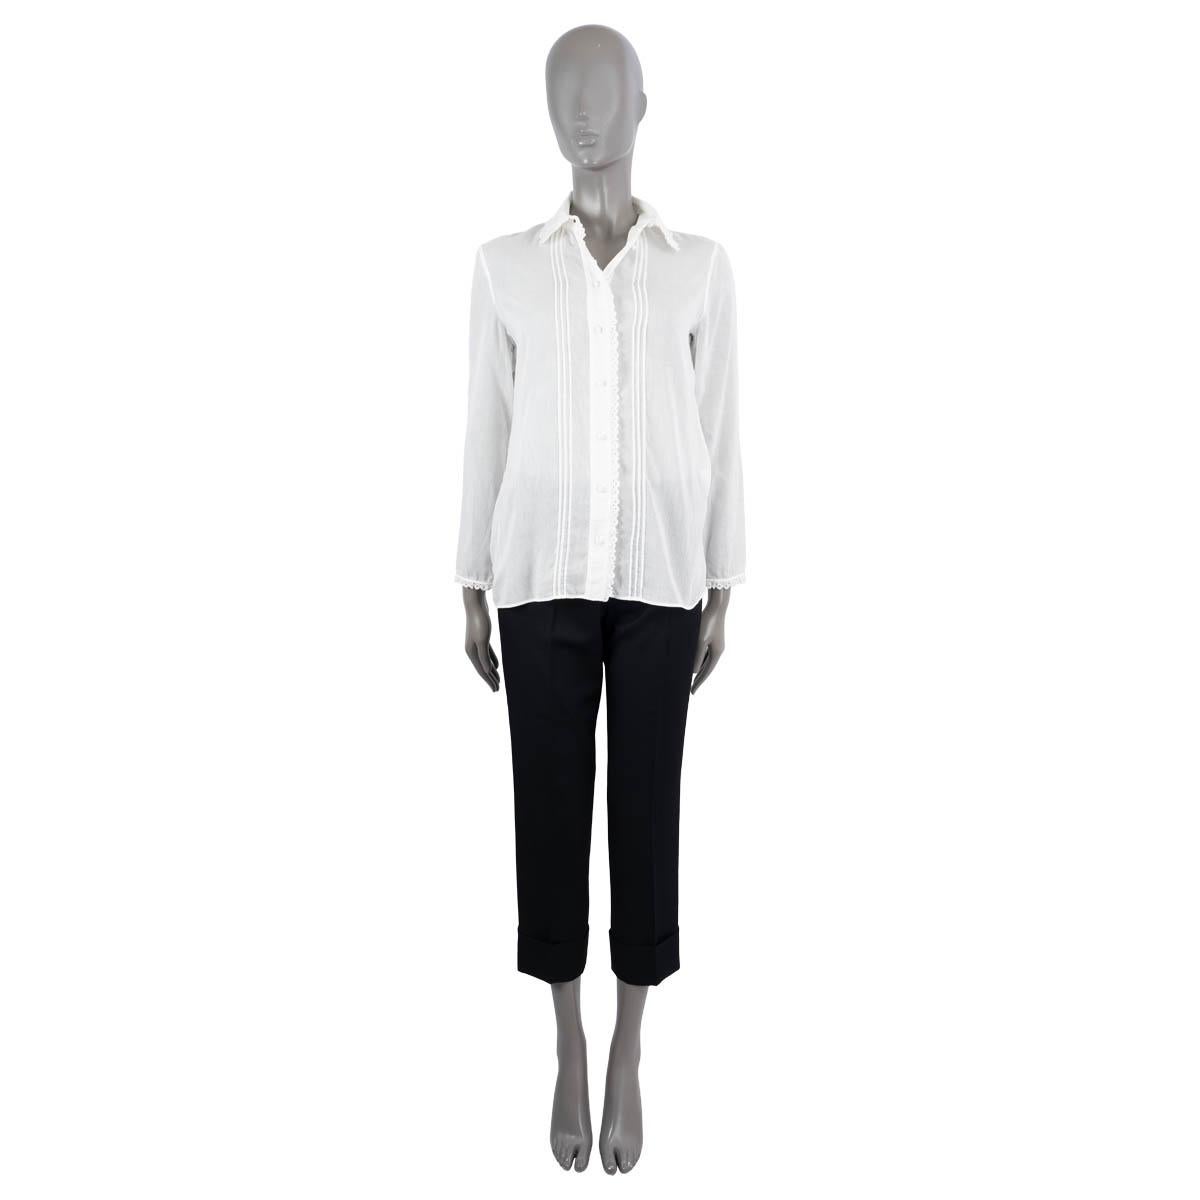 100% authentic Saint Laurent 2015 sheer white cotton (100%) blouse featuring broderie anglaise trim and front pleats.  Has been worn and is in excellent condition. 

Measurements
Tag Size	36
Size	XS
Shoulder Width	37cm (14.4in)
Bust From	96cm